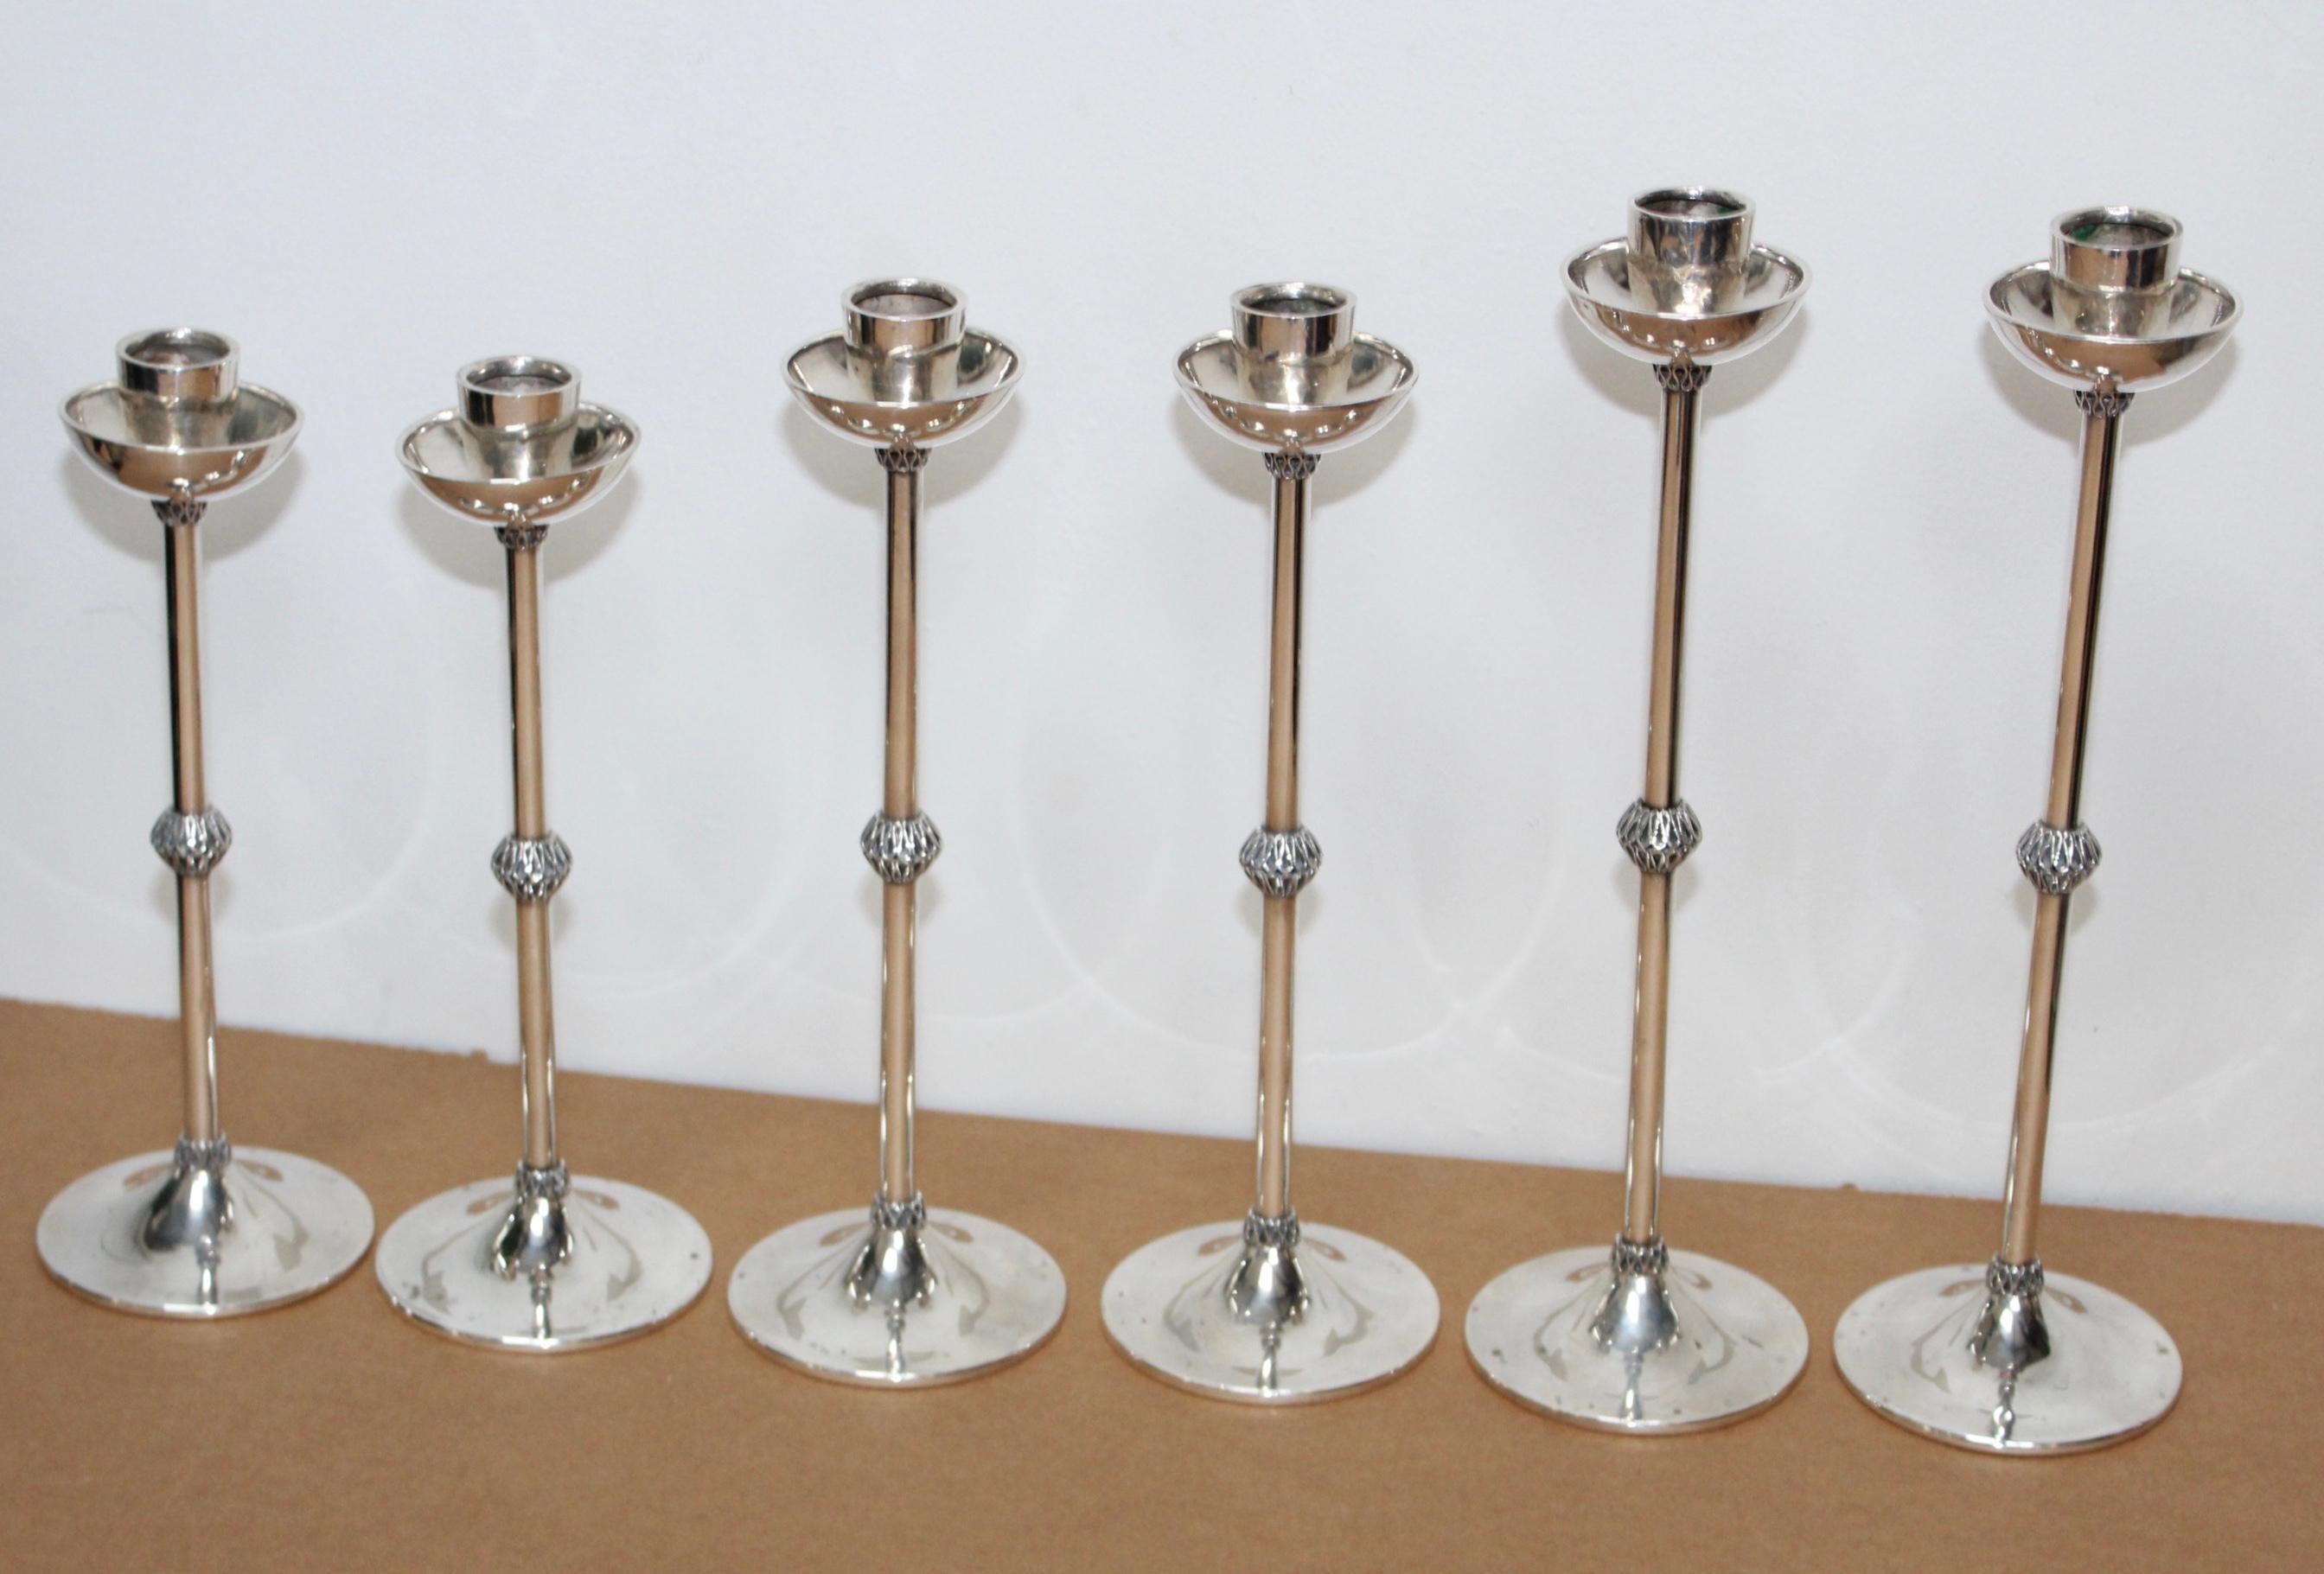 Beautiful set of 6 1940s Art Deco sterling silver candlesticks, in vintage original condition with some wear and patina and a few small dents.

The measurements are:

Large height 13”, diameter 3.75”
medium 11.5”, diameter 3.75”
Small 10.5”,